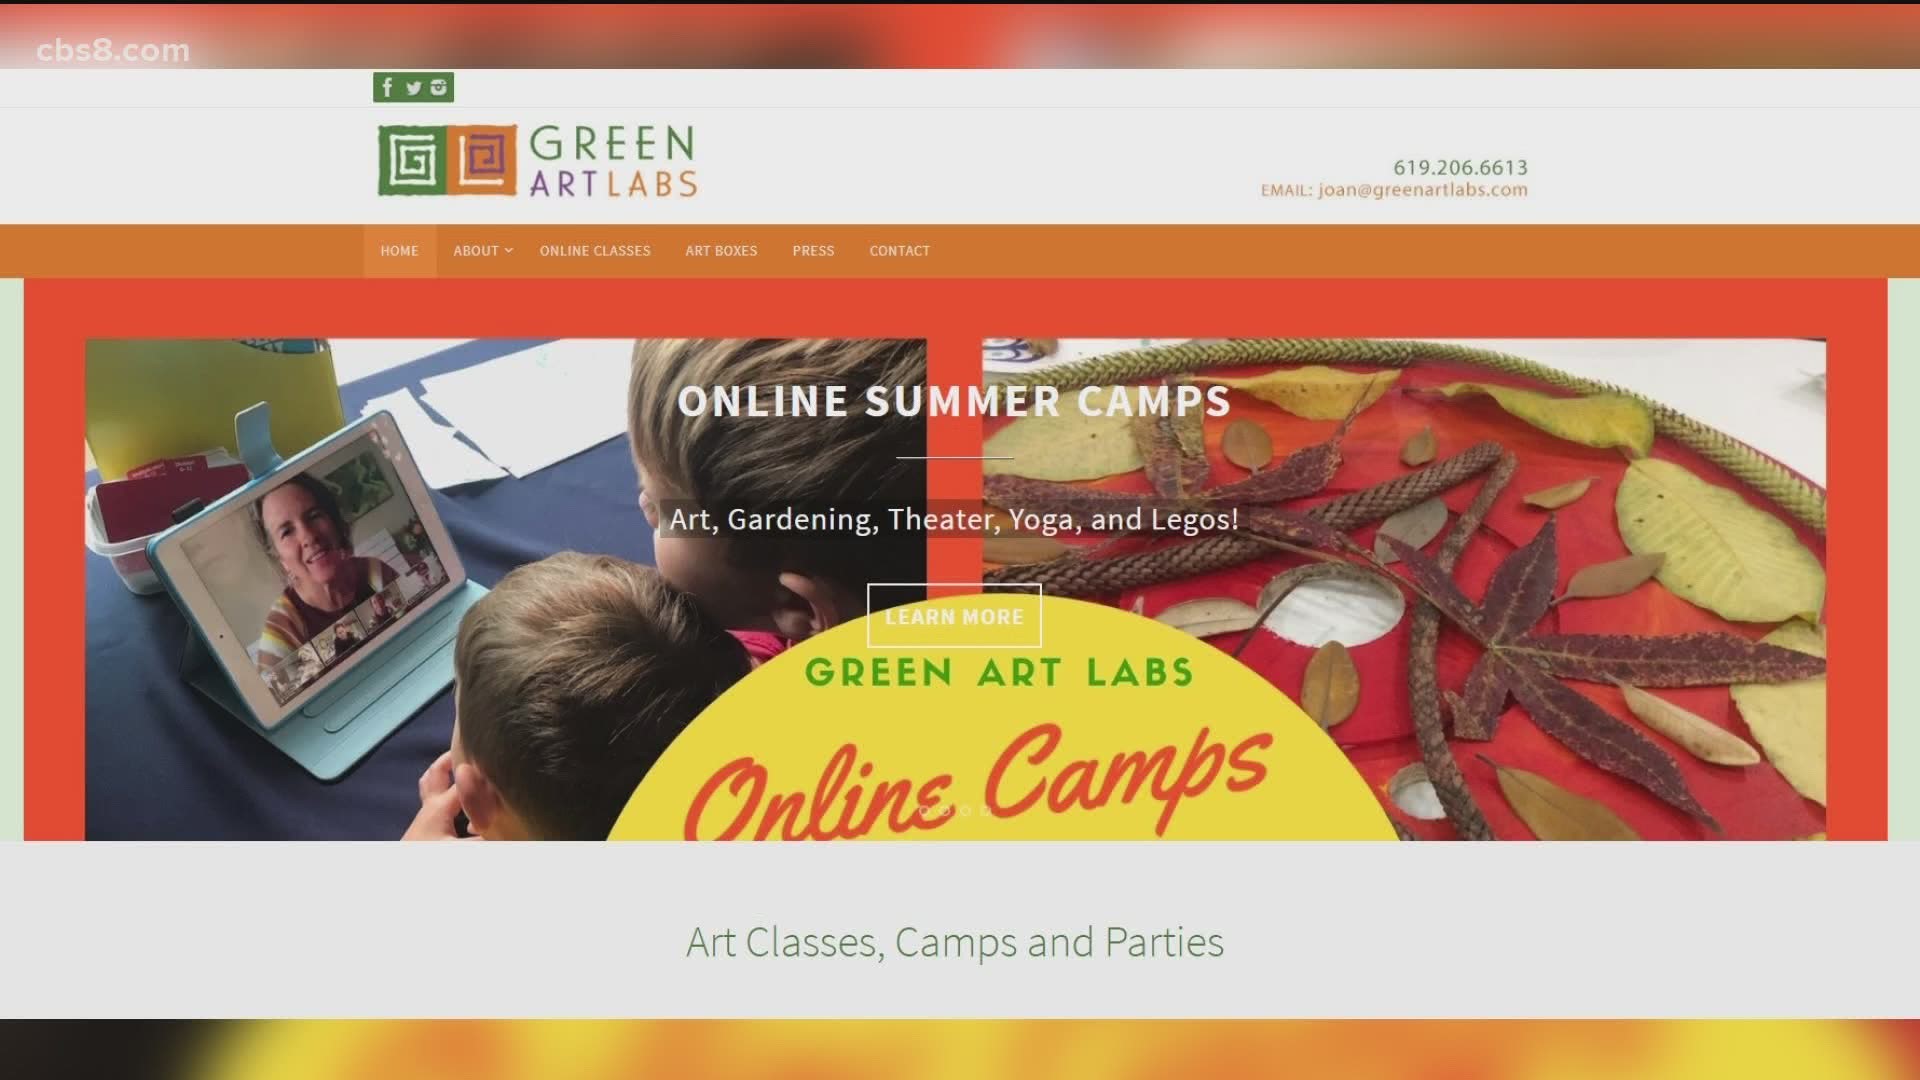 Artist and owner of Green Art Labs, Joan Green along with multiple teachers and student, Pedro, joined Morning Extra to talk about the camp. www.greenartlabs.com